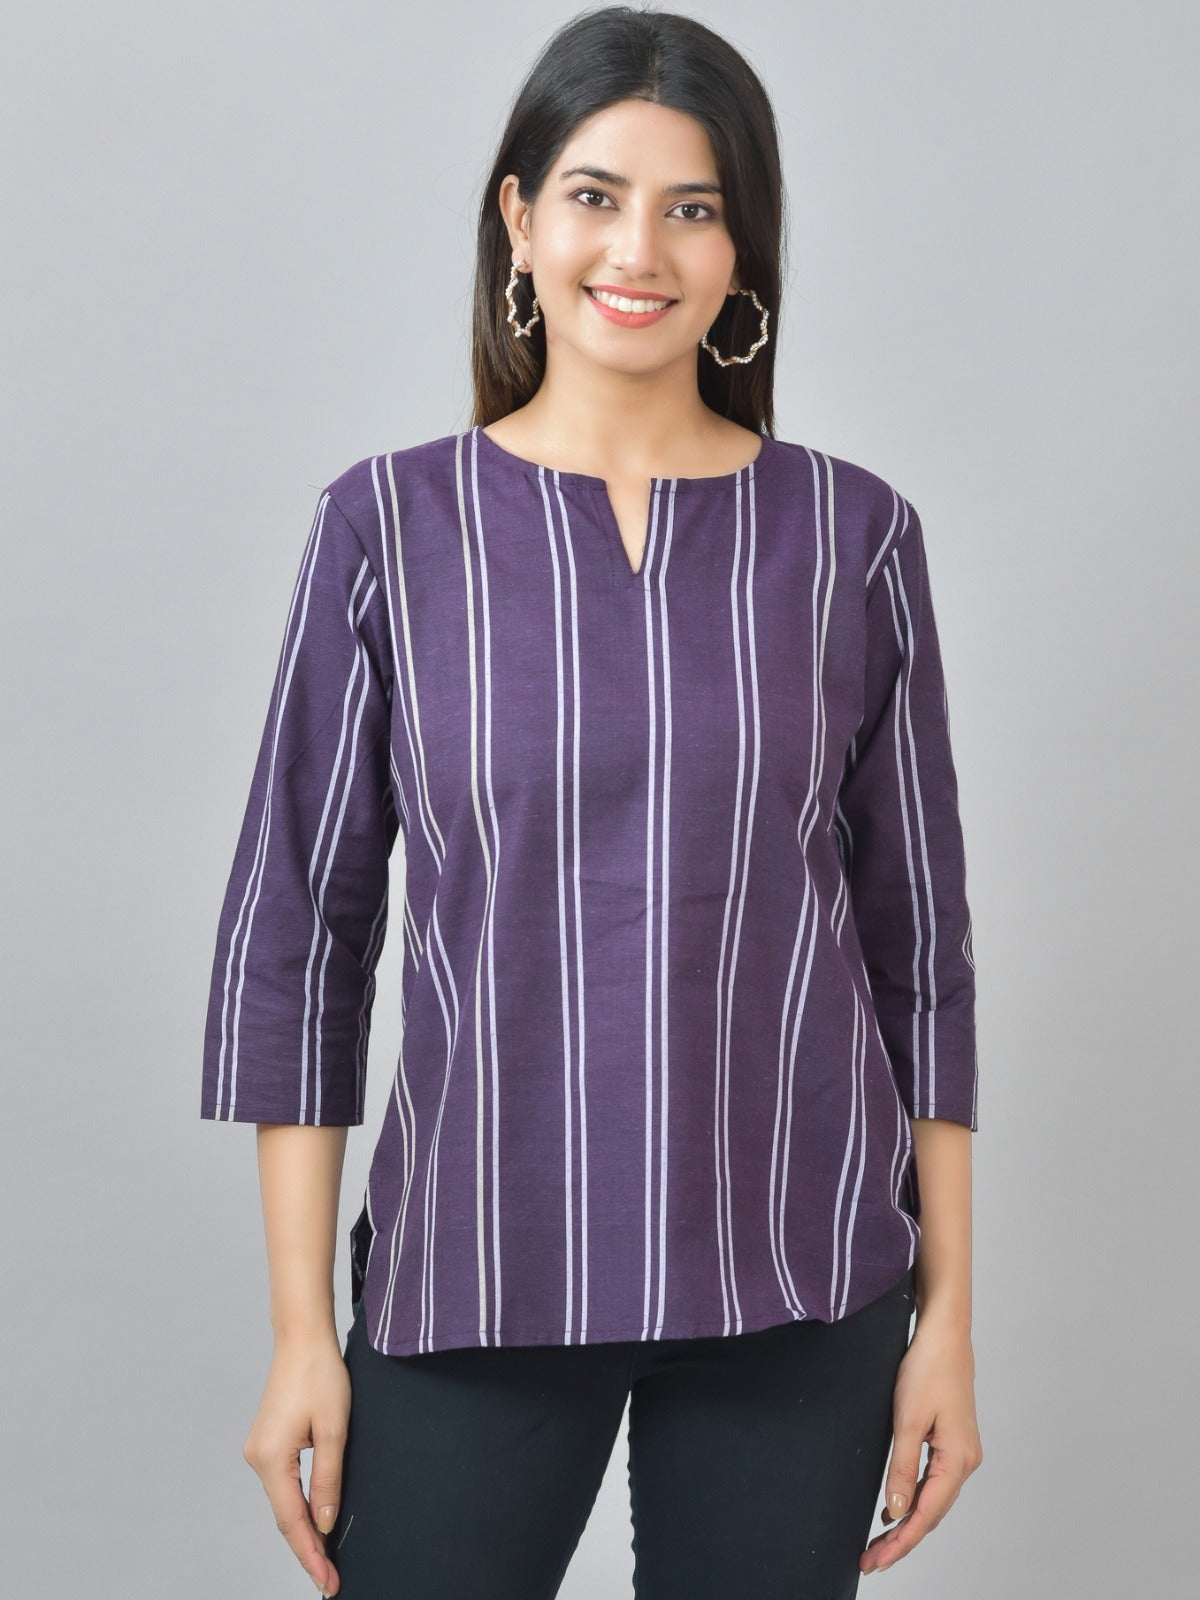 Pack Of 2 Brown And Purple Striped Cotton Womens Top Combo